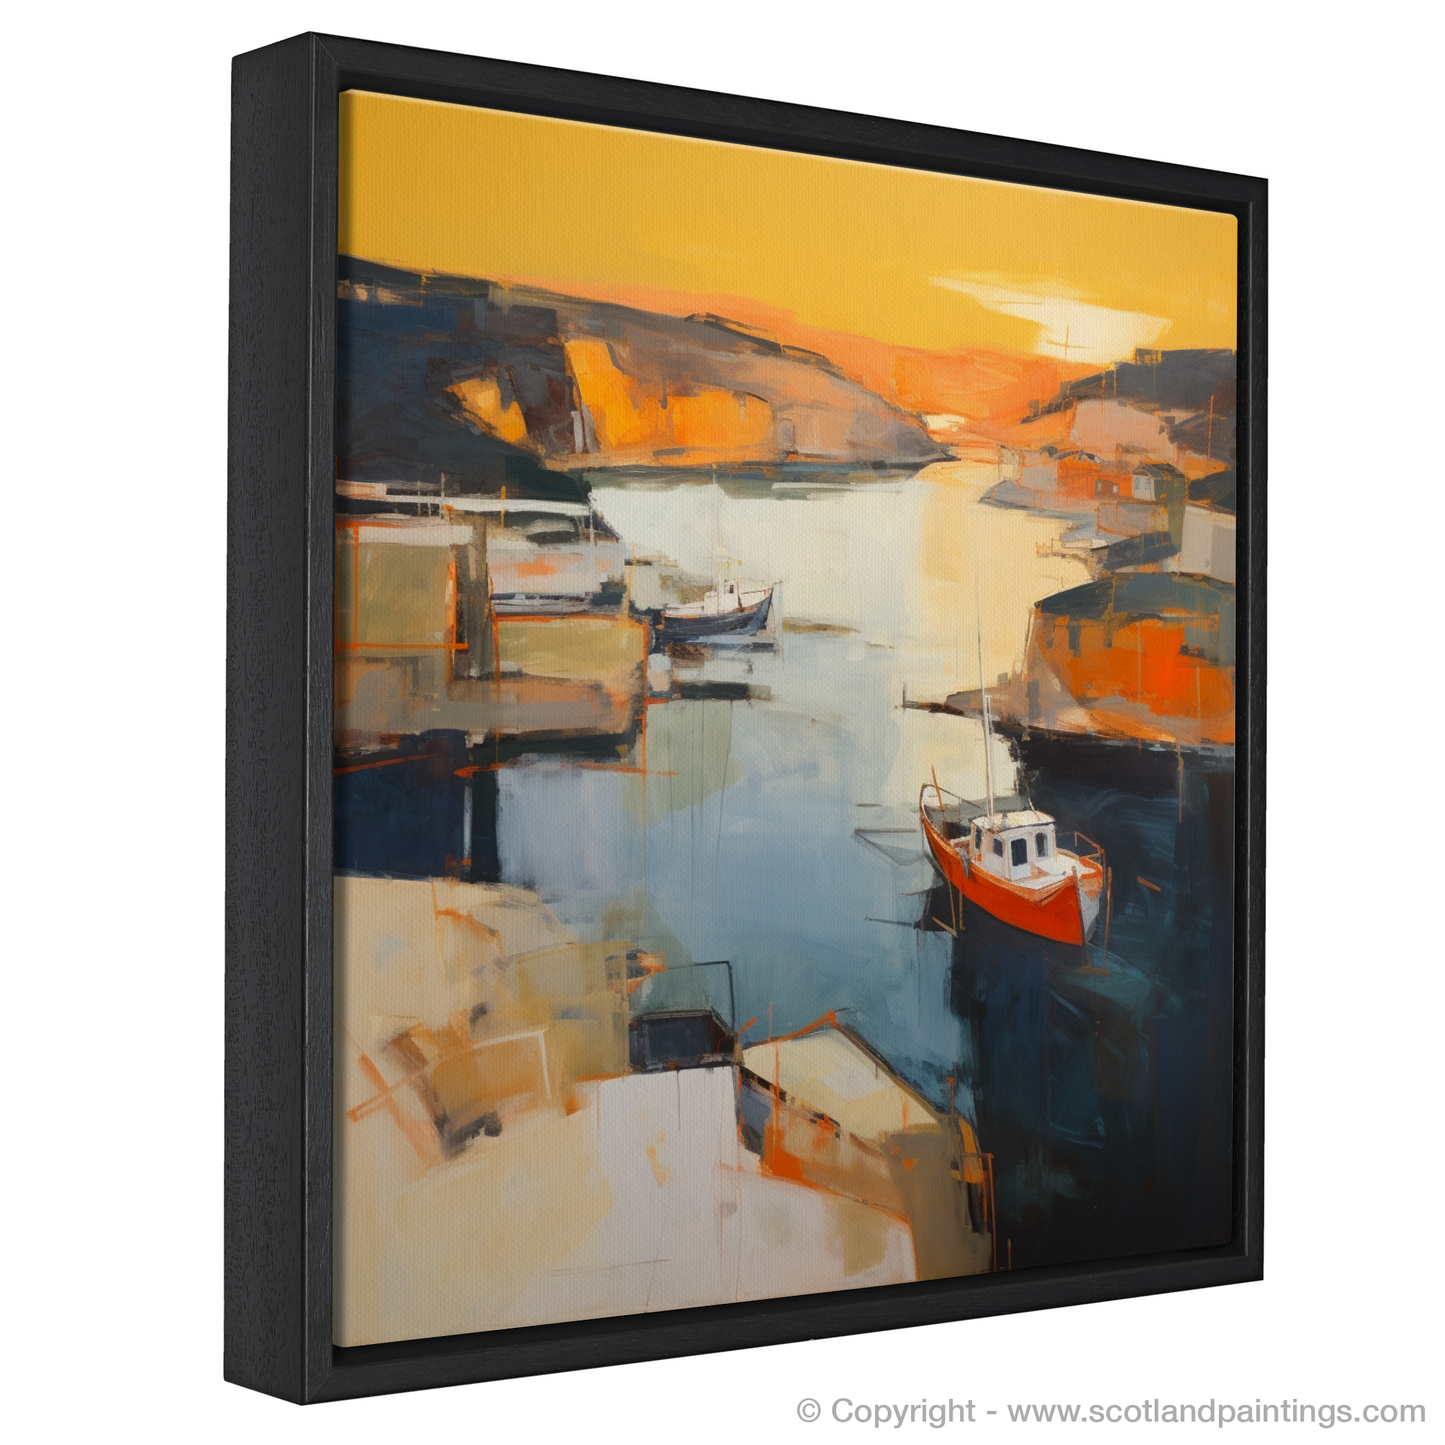 Golden Embrace at St Abba's Harbour - An Abstract Impressionist Ode to the Scottish Coast